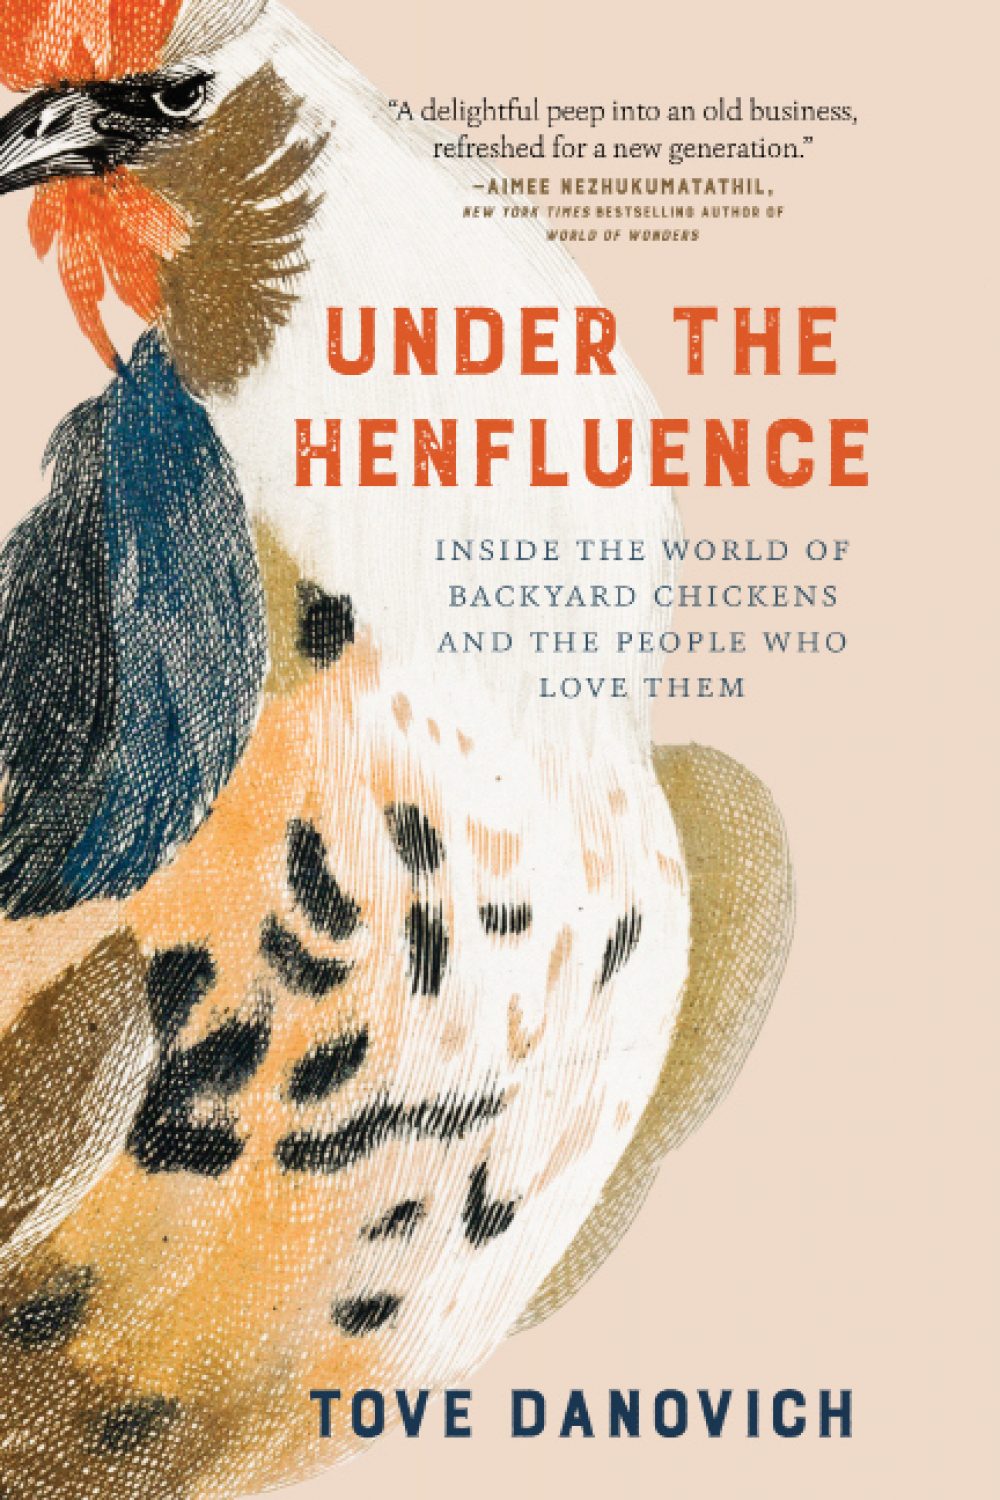 Book review i41 Under the Henfluence